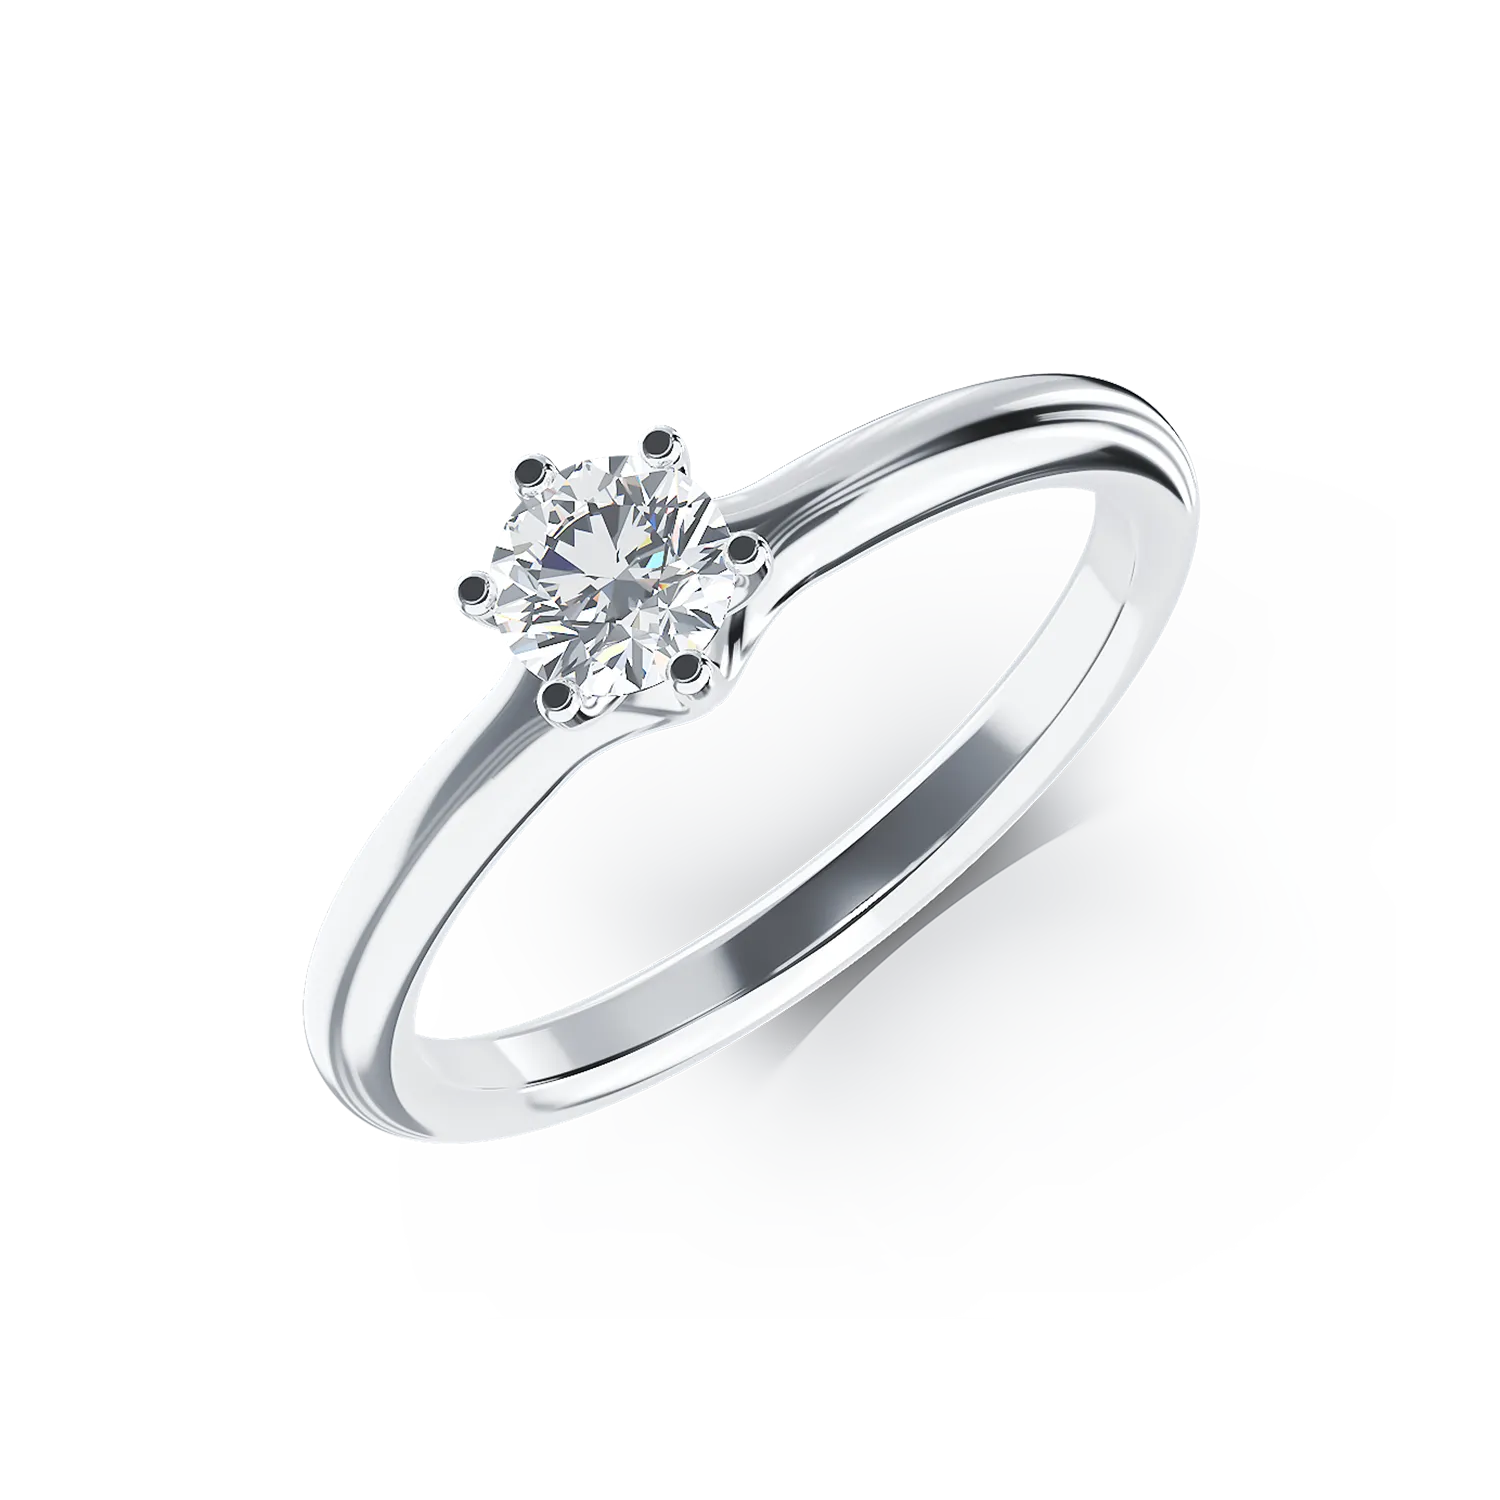 18K white gold engagement ring with a 0.31ct solitaire diamond